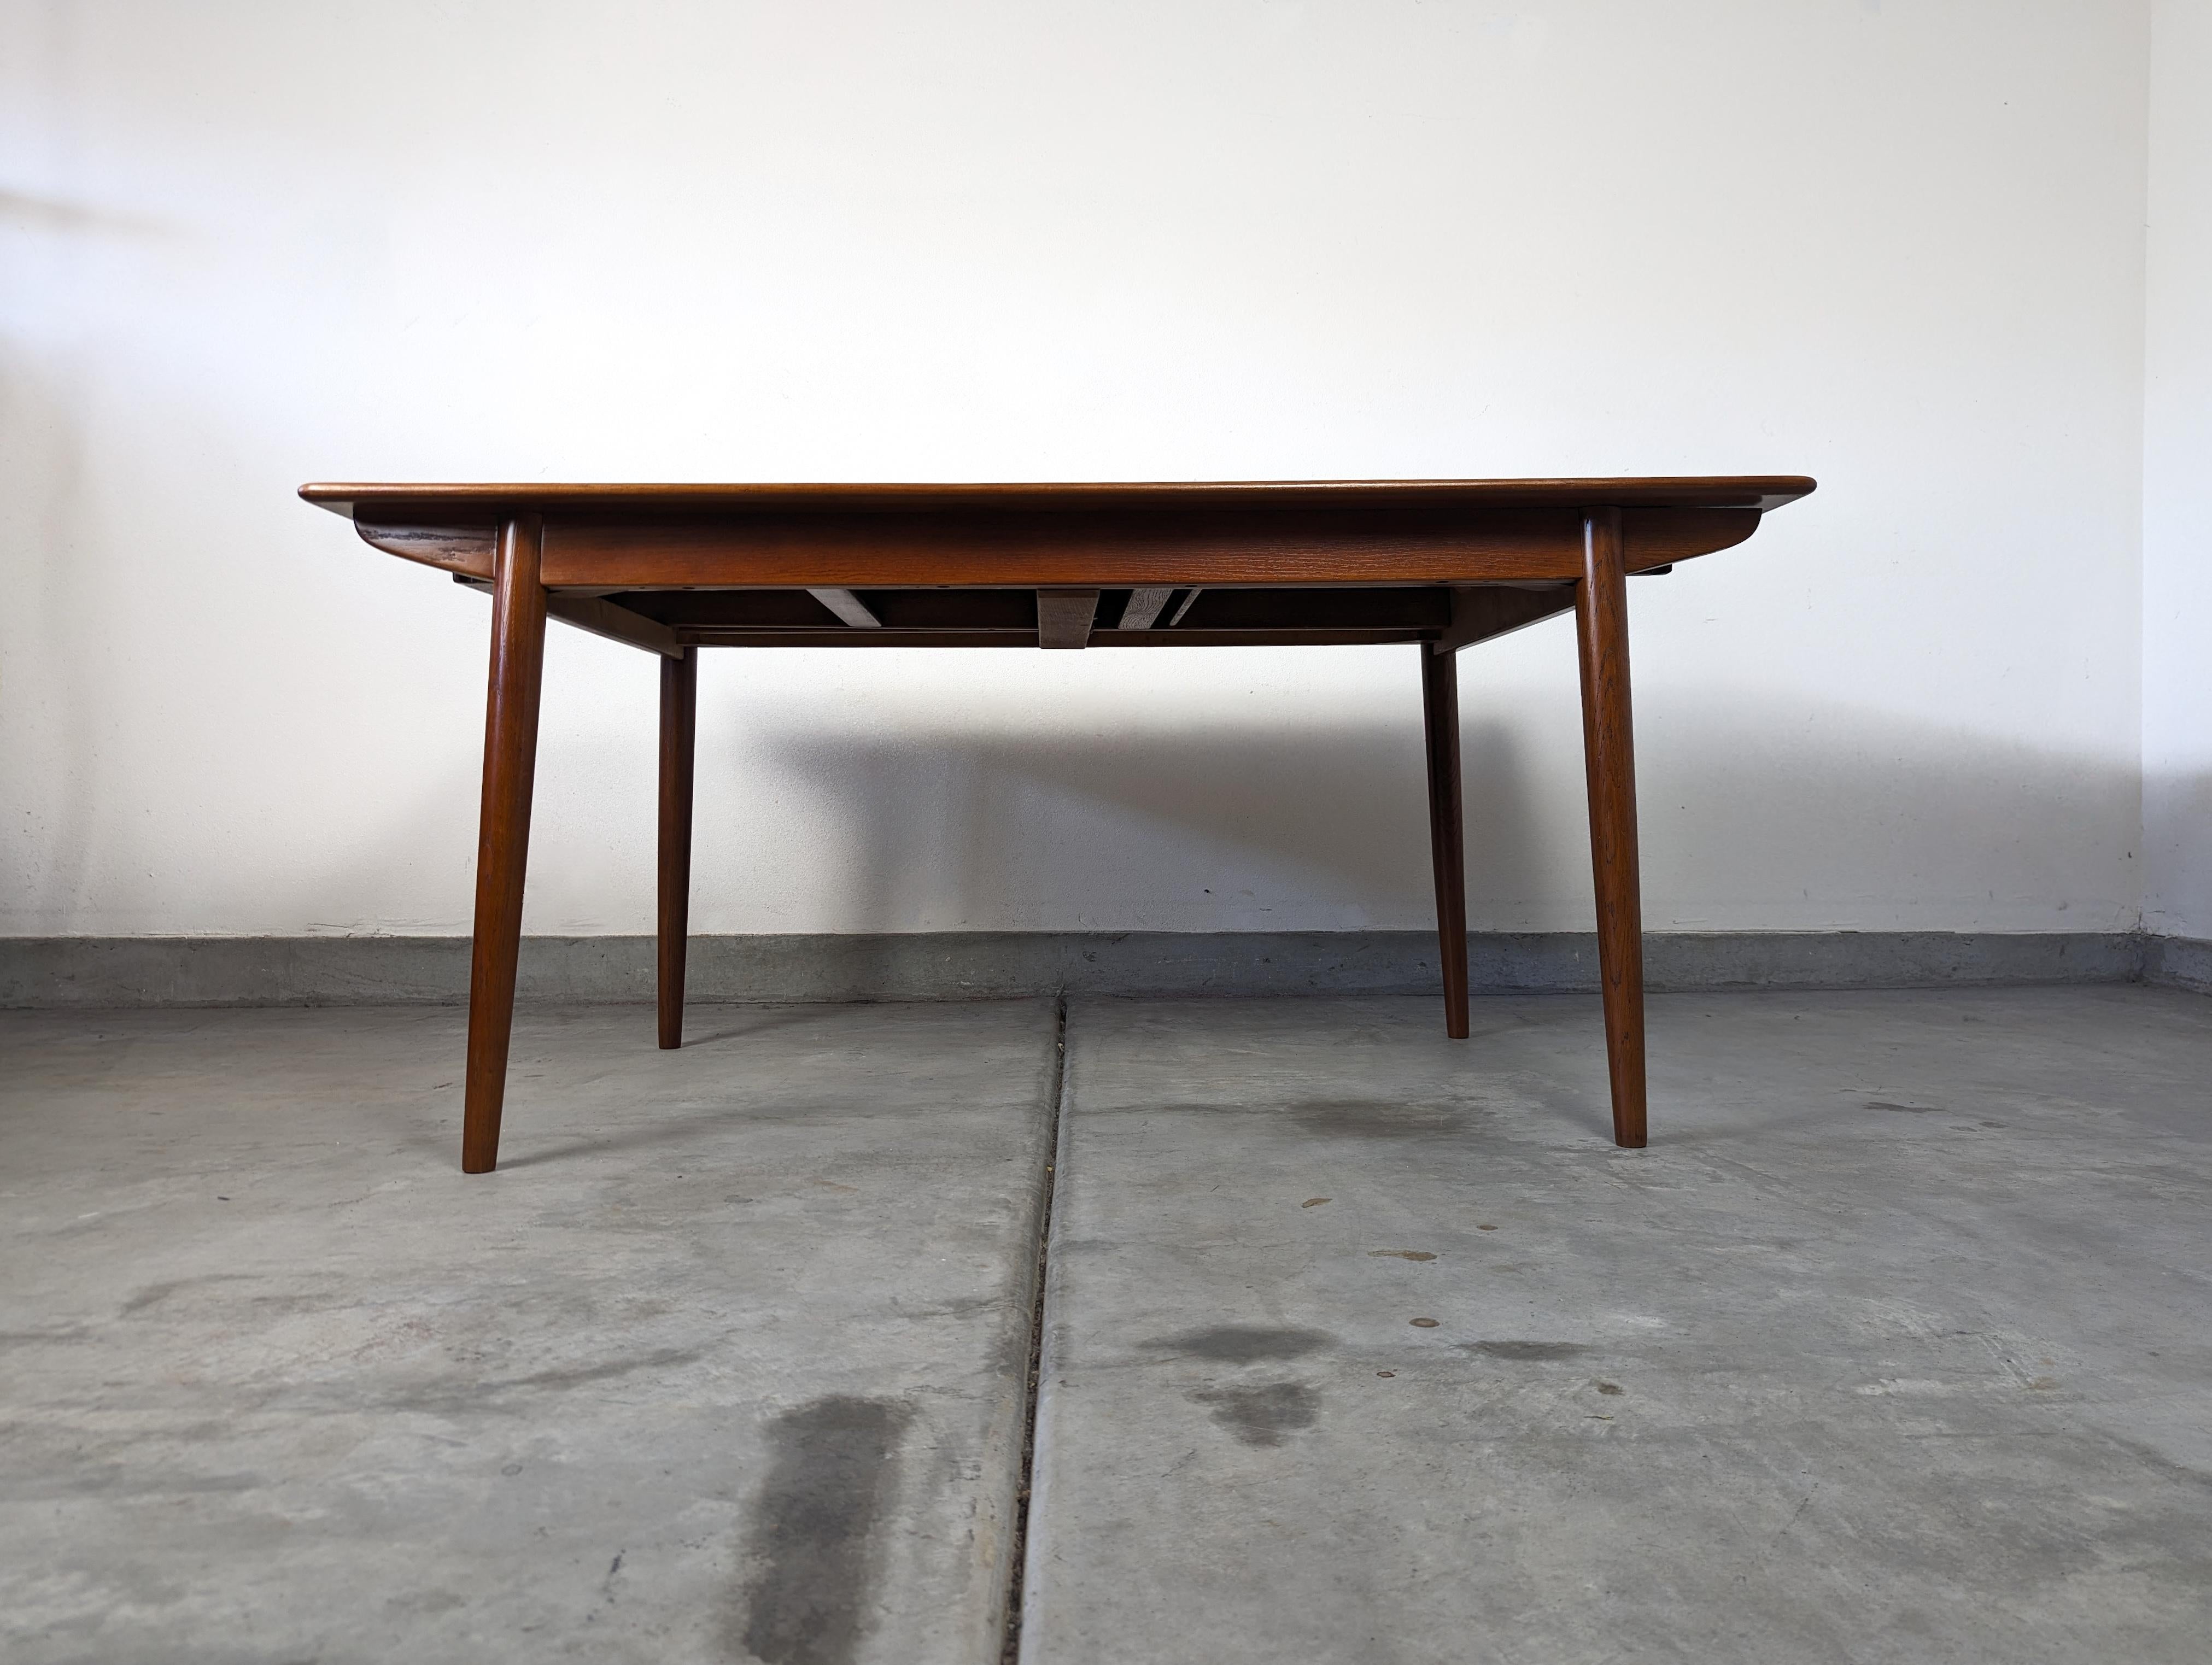 Elevate your dining experience with this stunning vintage Mid Century Modern teak dining table by Slagelse, a treasured piece from the 1960s. This remarkable and authentic piece hails from an era renowned for its timeless aesthetics and remarkable